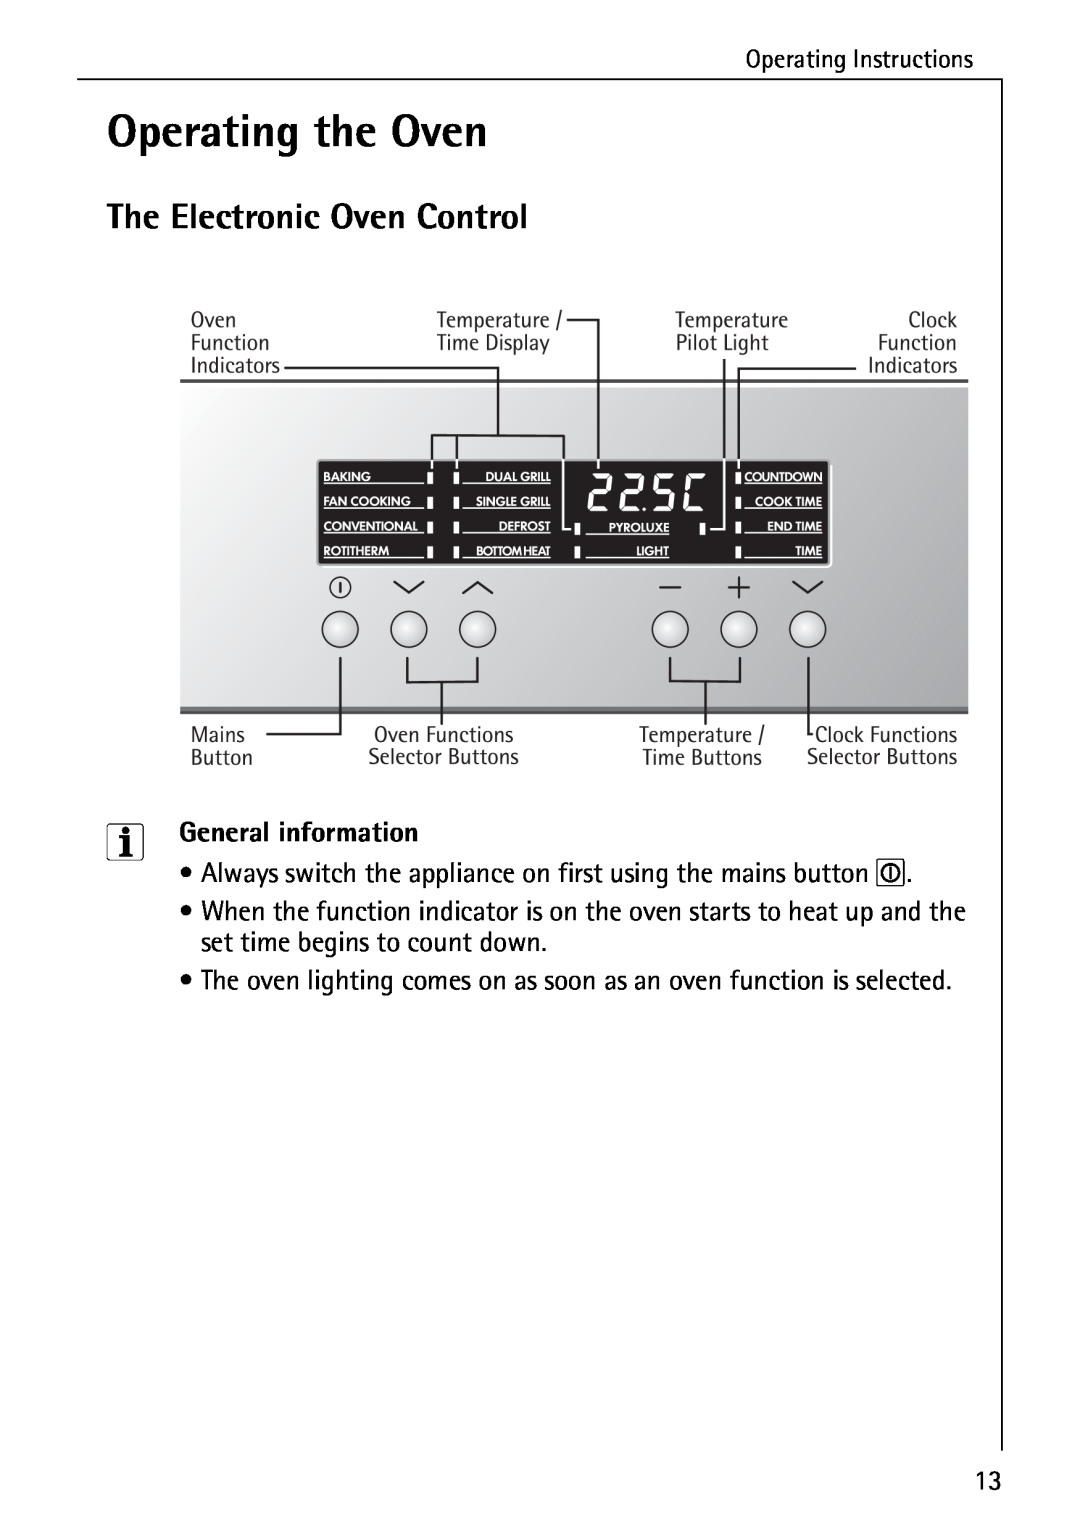 Electrolux B6140-1 manual Operating the Oven, The Electronic Oven Control, General information, Operating Instructions 